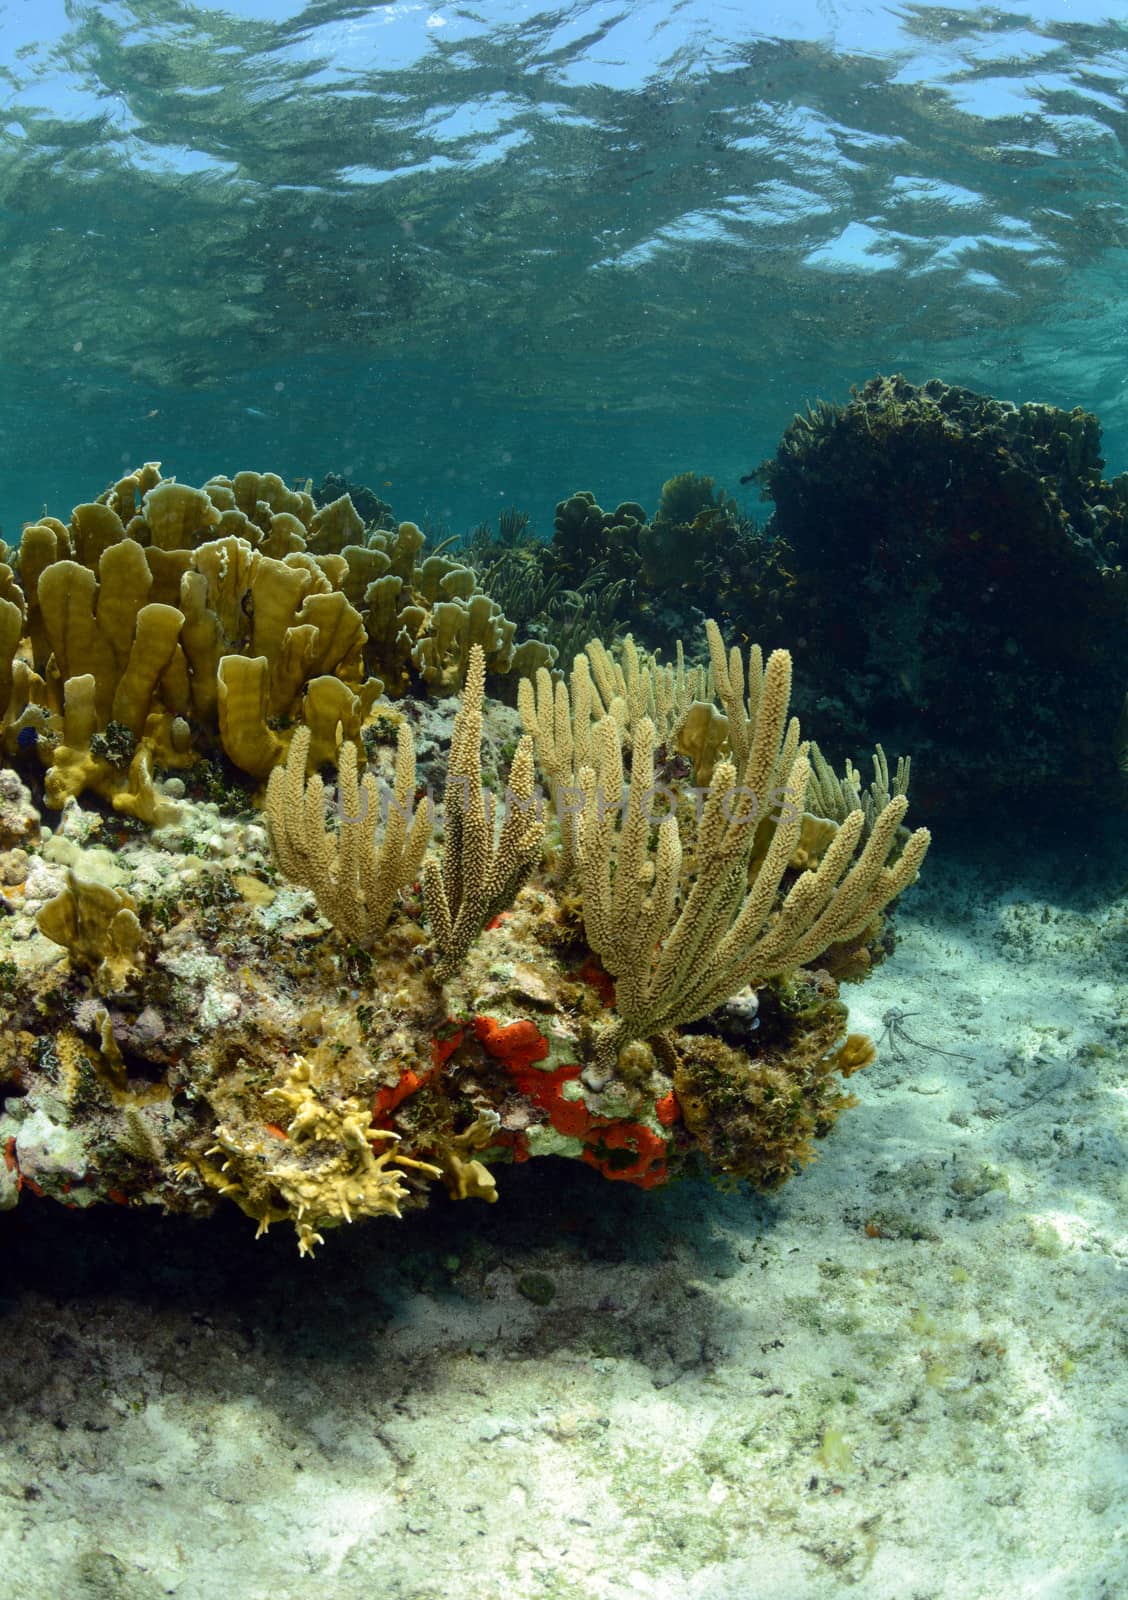 Coral and sea life in a beautiful underwater tropical seascape